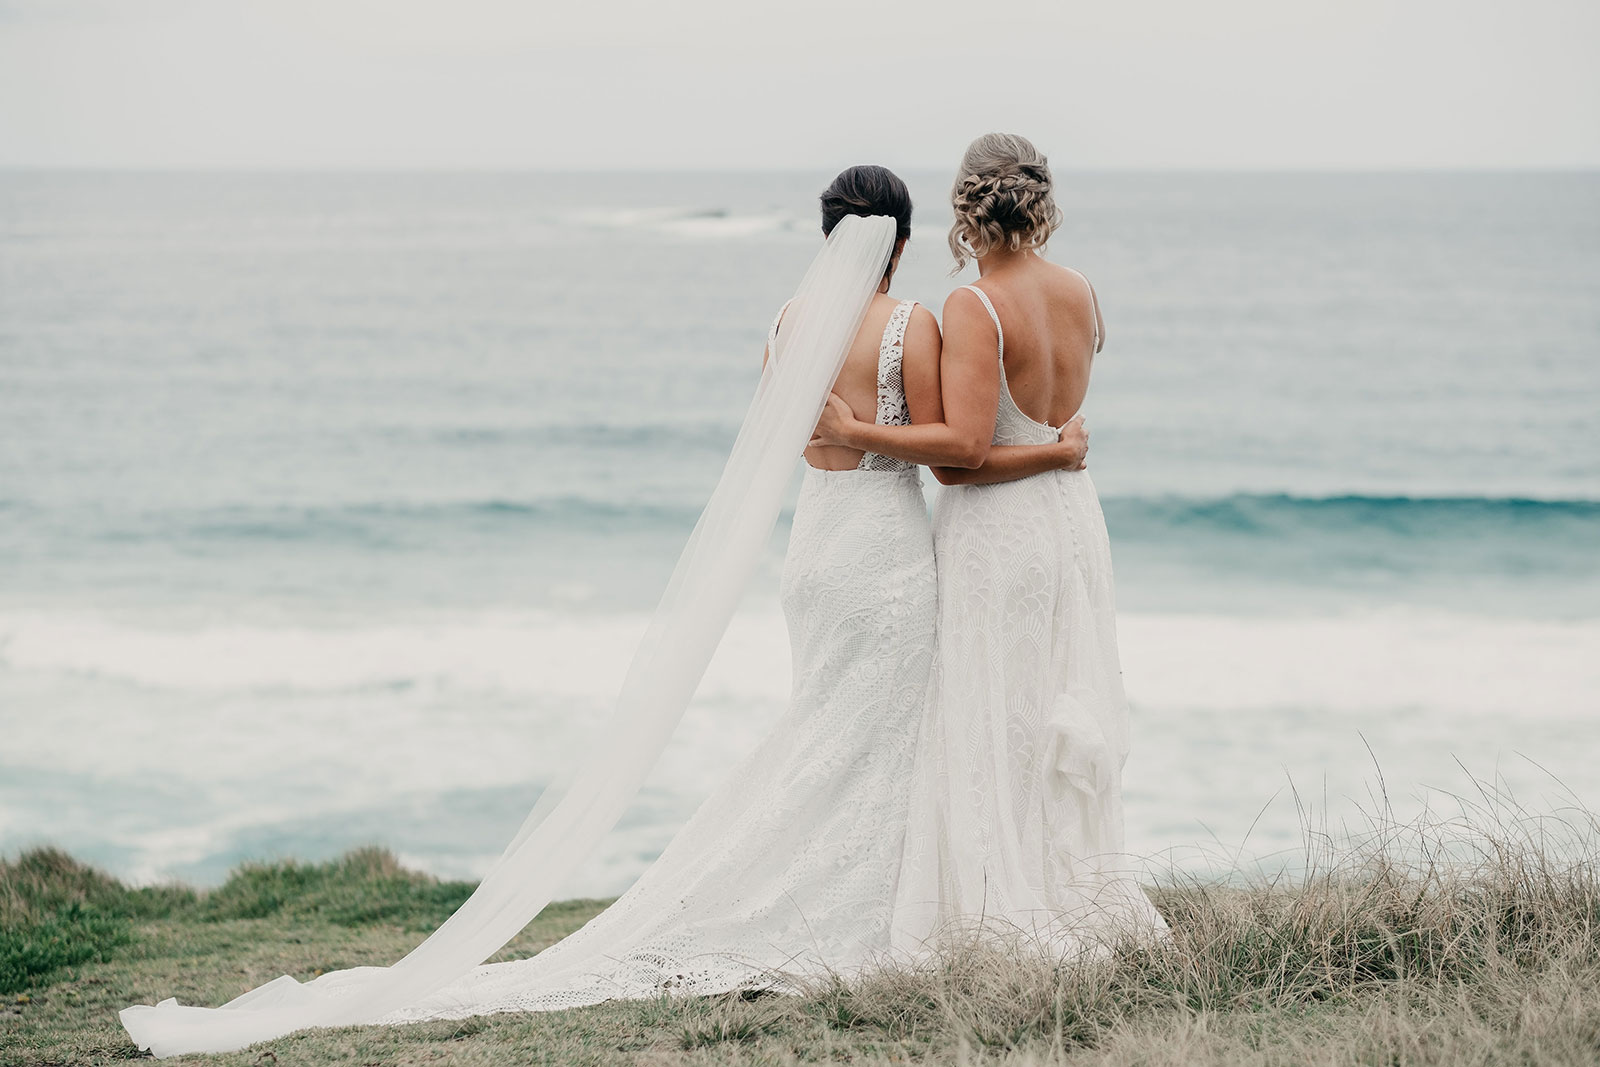 Courtney and Sheridynn by the sea wedding photo